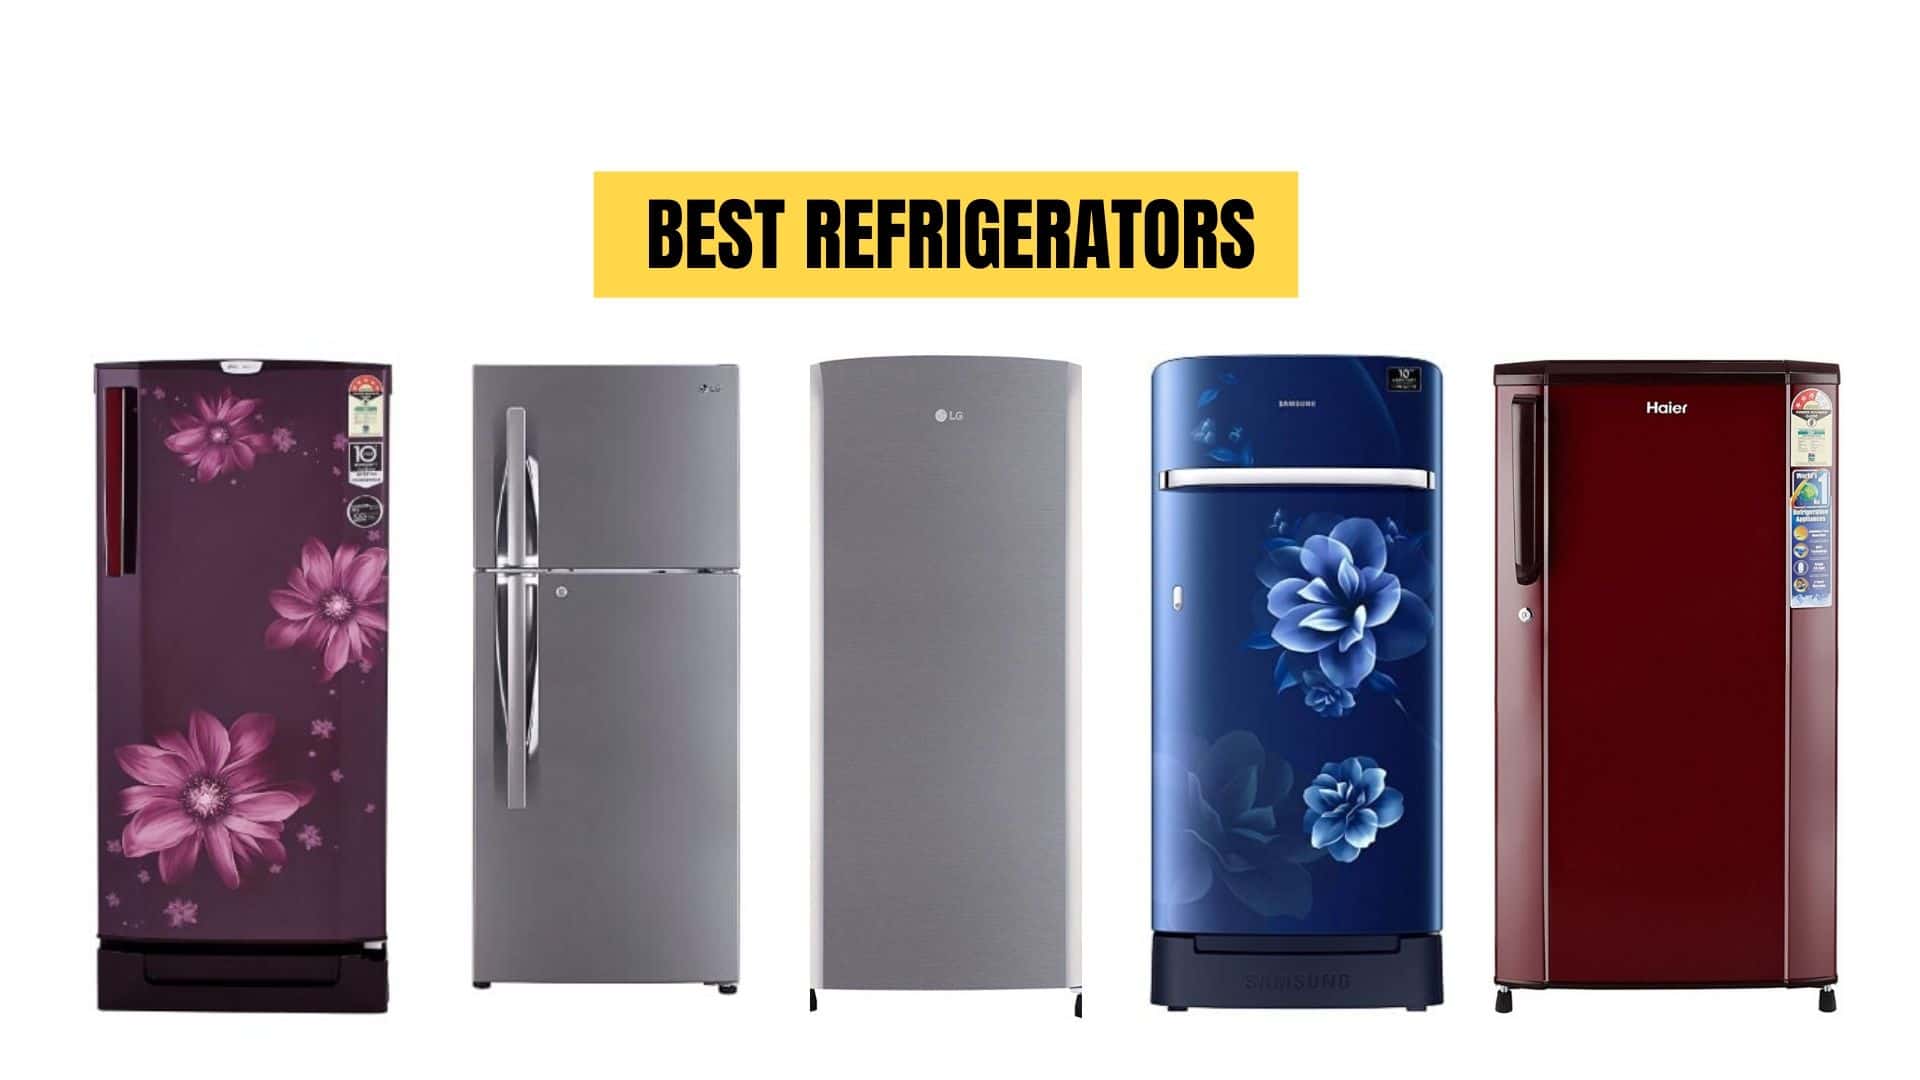 Auto Defrost vs. Frost-Free Freezers: What's the Difference?